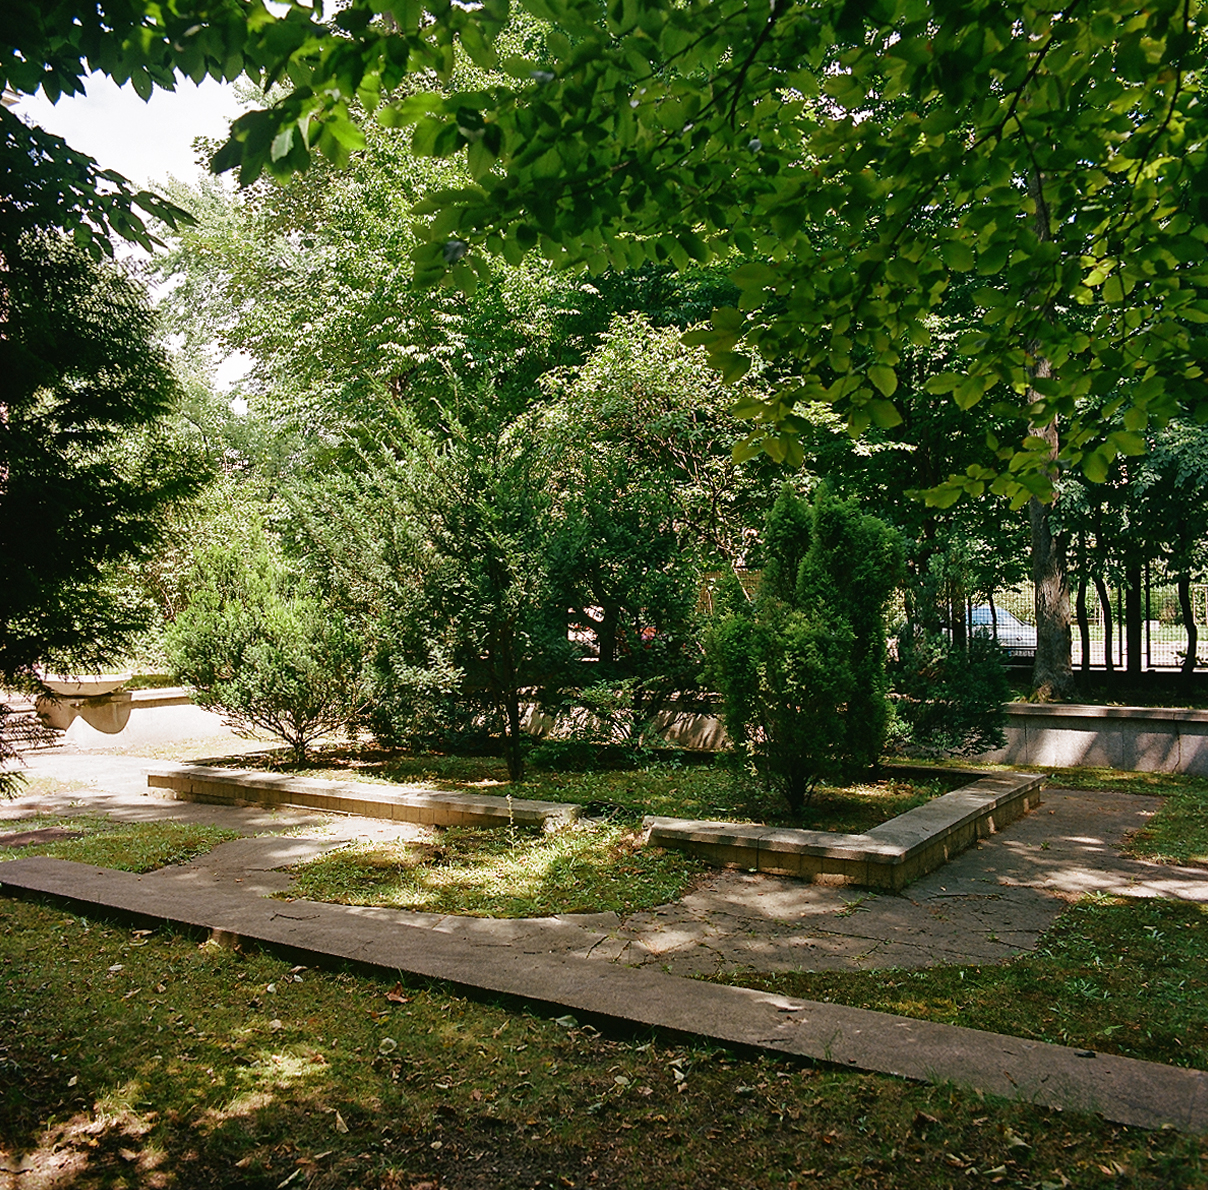 The pool in the garden of the Radium Institute, inaugurated by Maria Skłodowska-Curie in 1925 on Wawelska Street in Warsaw. The pond needs to be emptied, repaired, the stylised with features of the small architecture and replanted with aquatic plants.